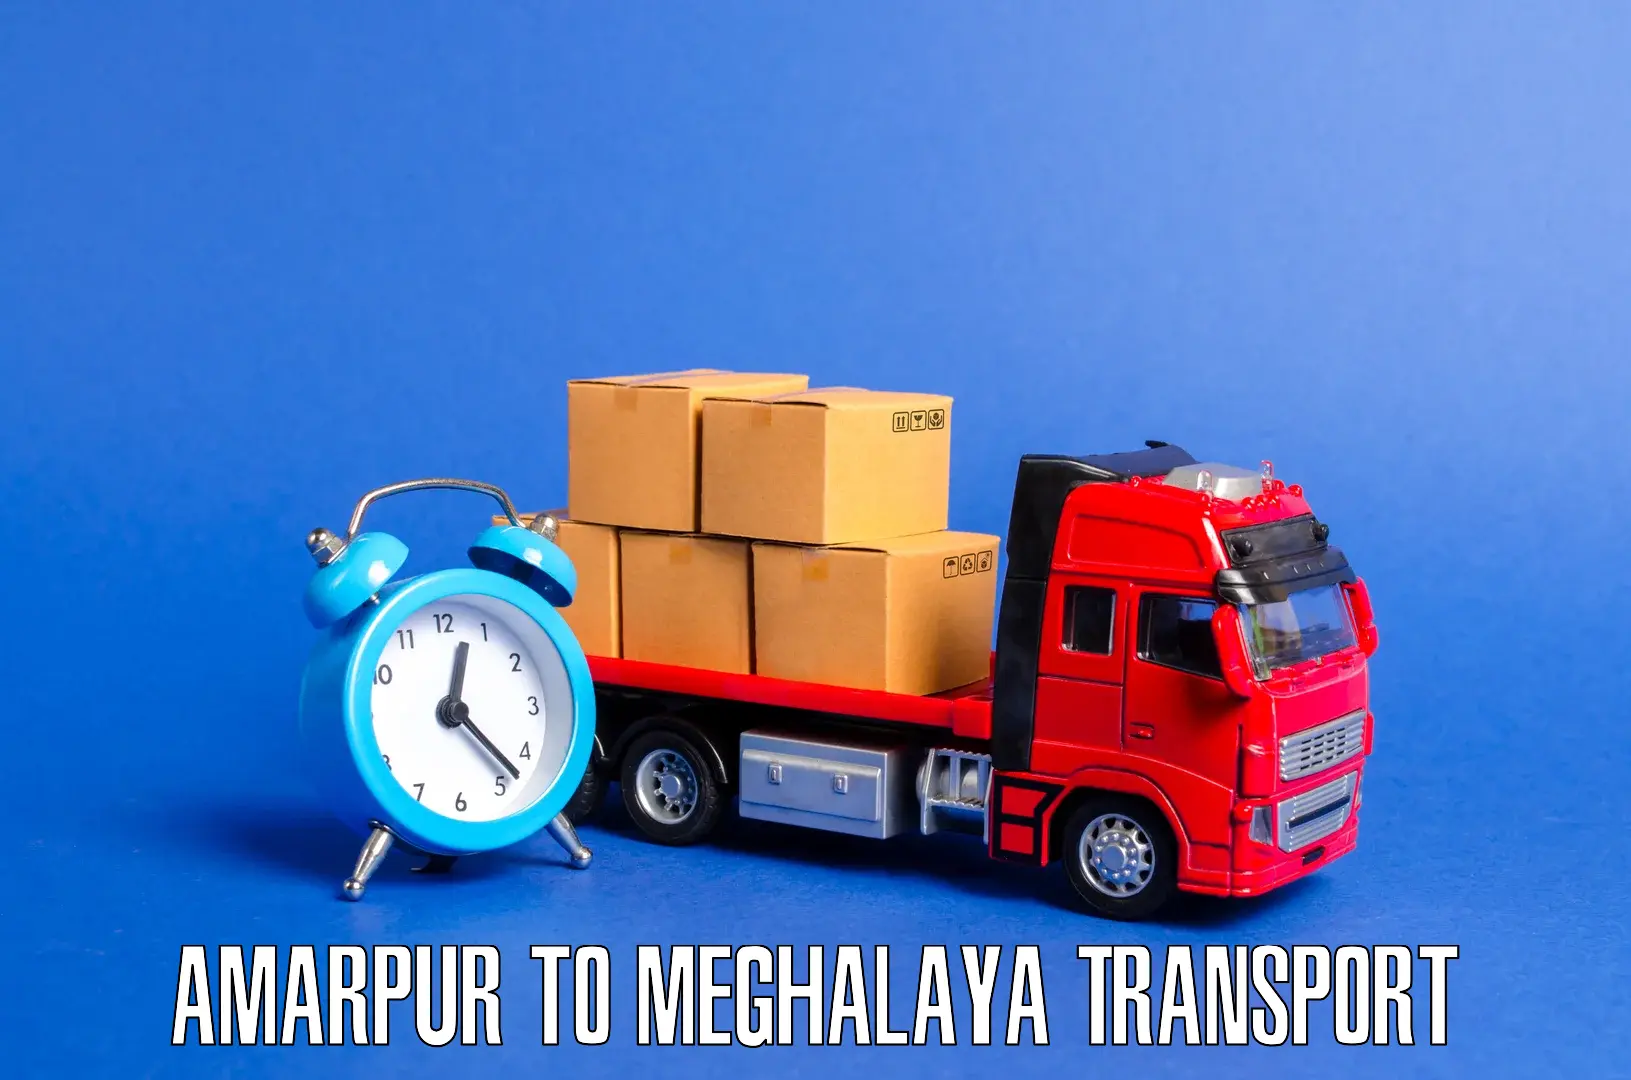 Lorry transport service in Amarpur to Shillong